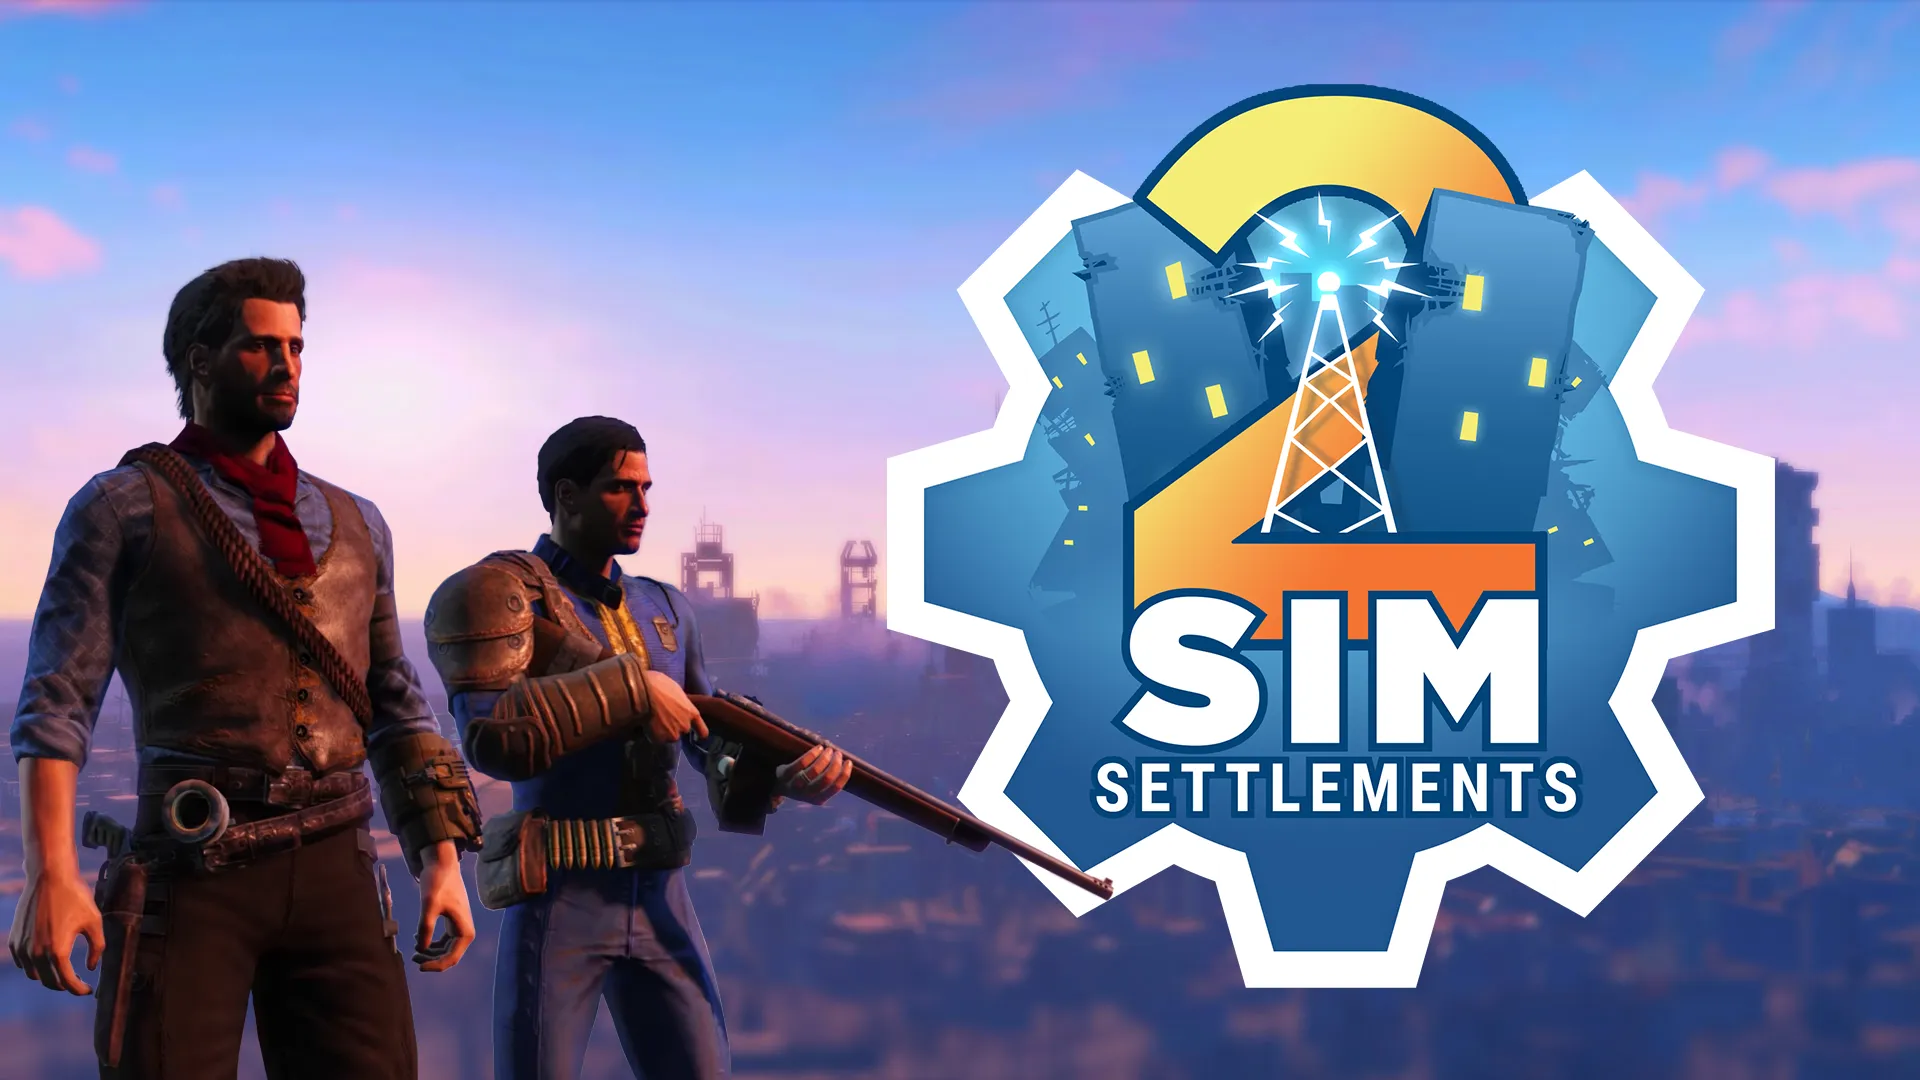 Screenshot from Fallout 4 showing the Sim Settlement's logo to one side.